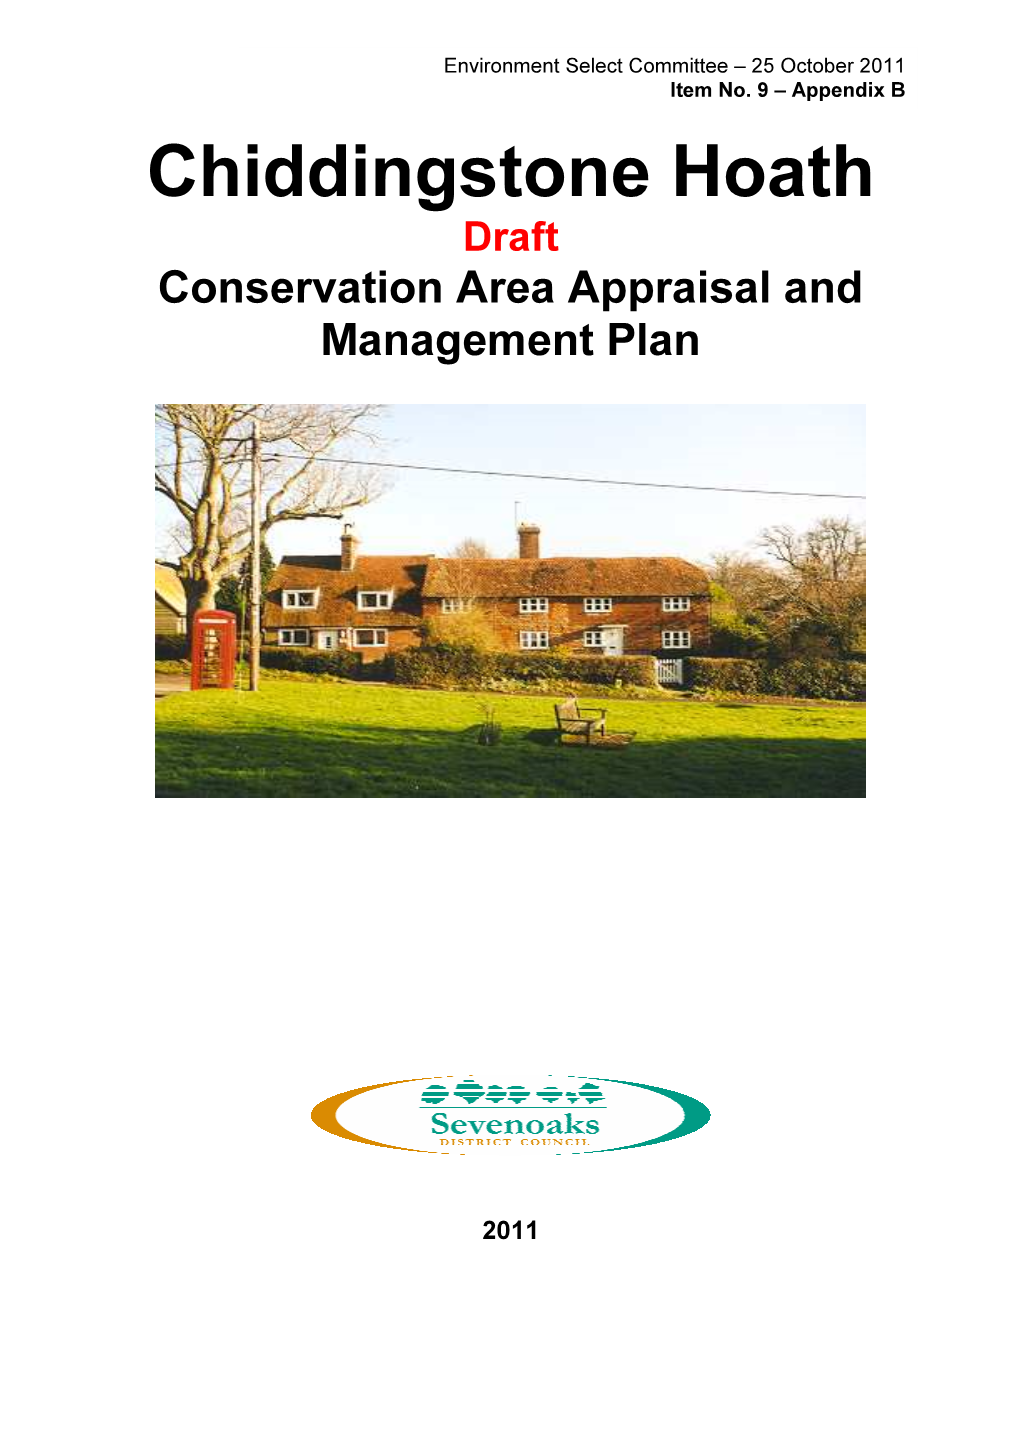 Chiddingstone Hoath Draft Conservation Area Appraisal and Management Plan